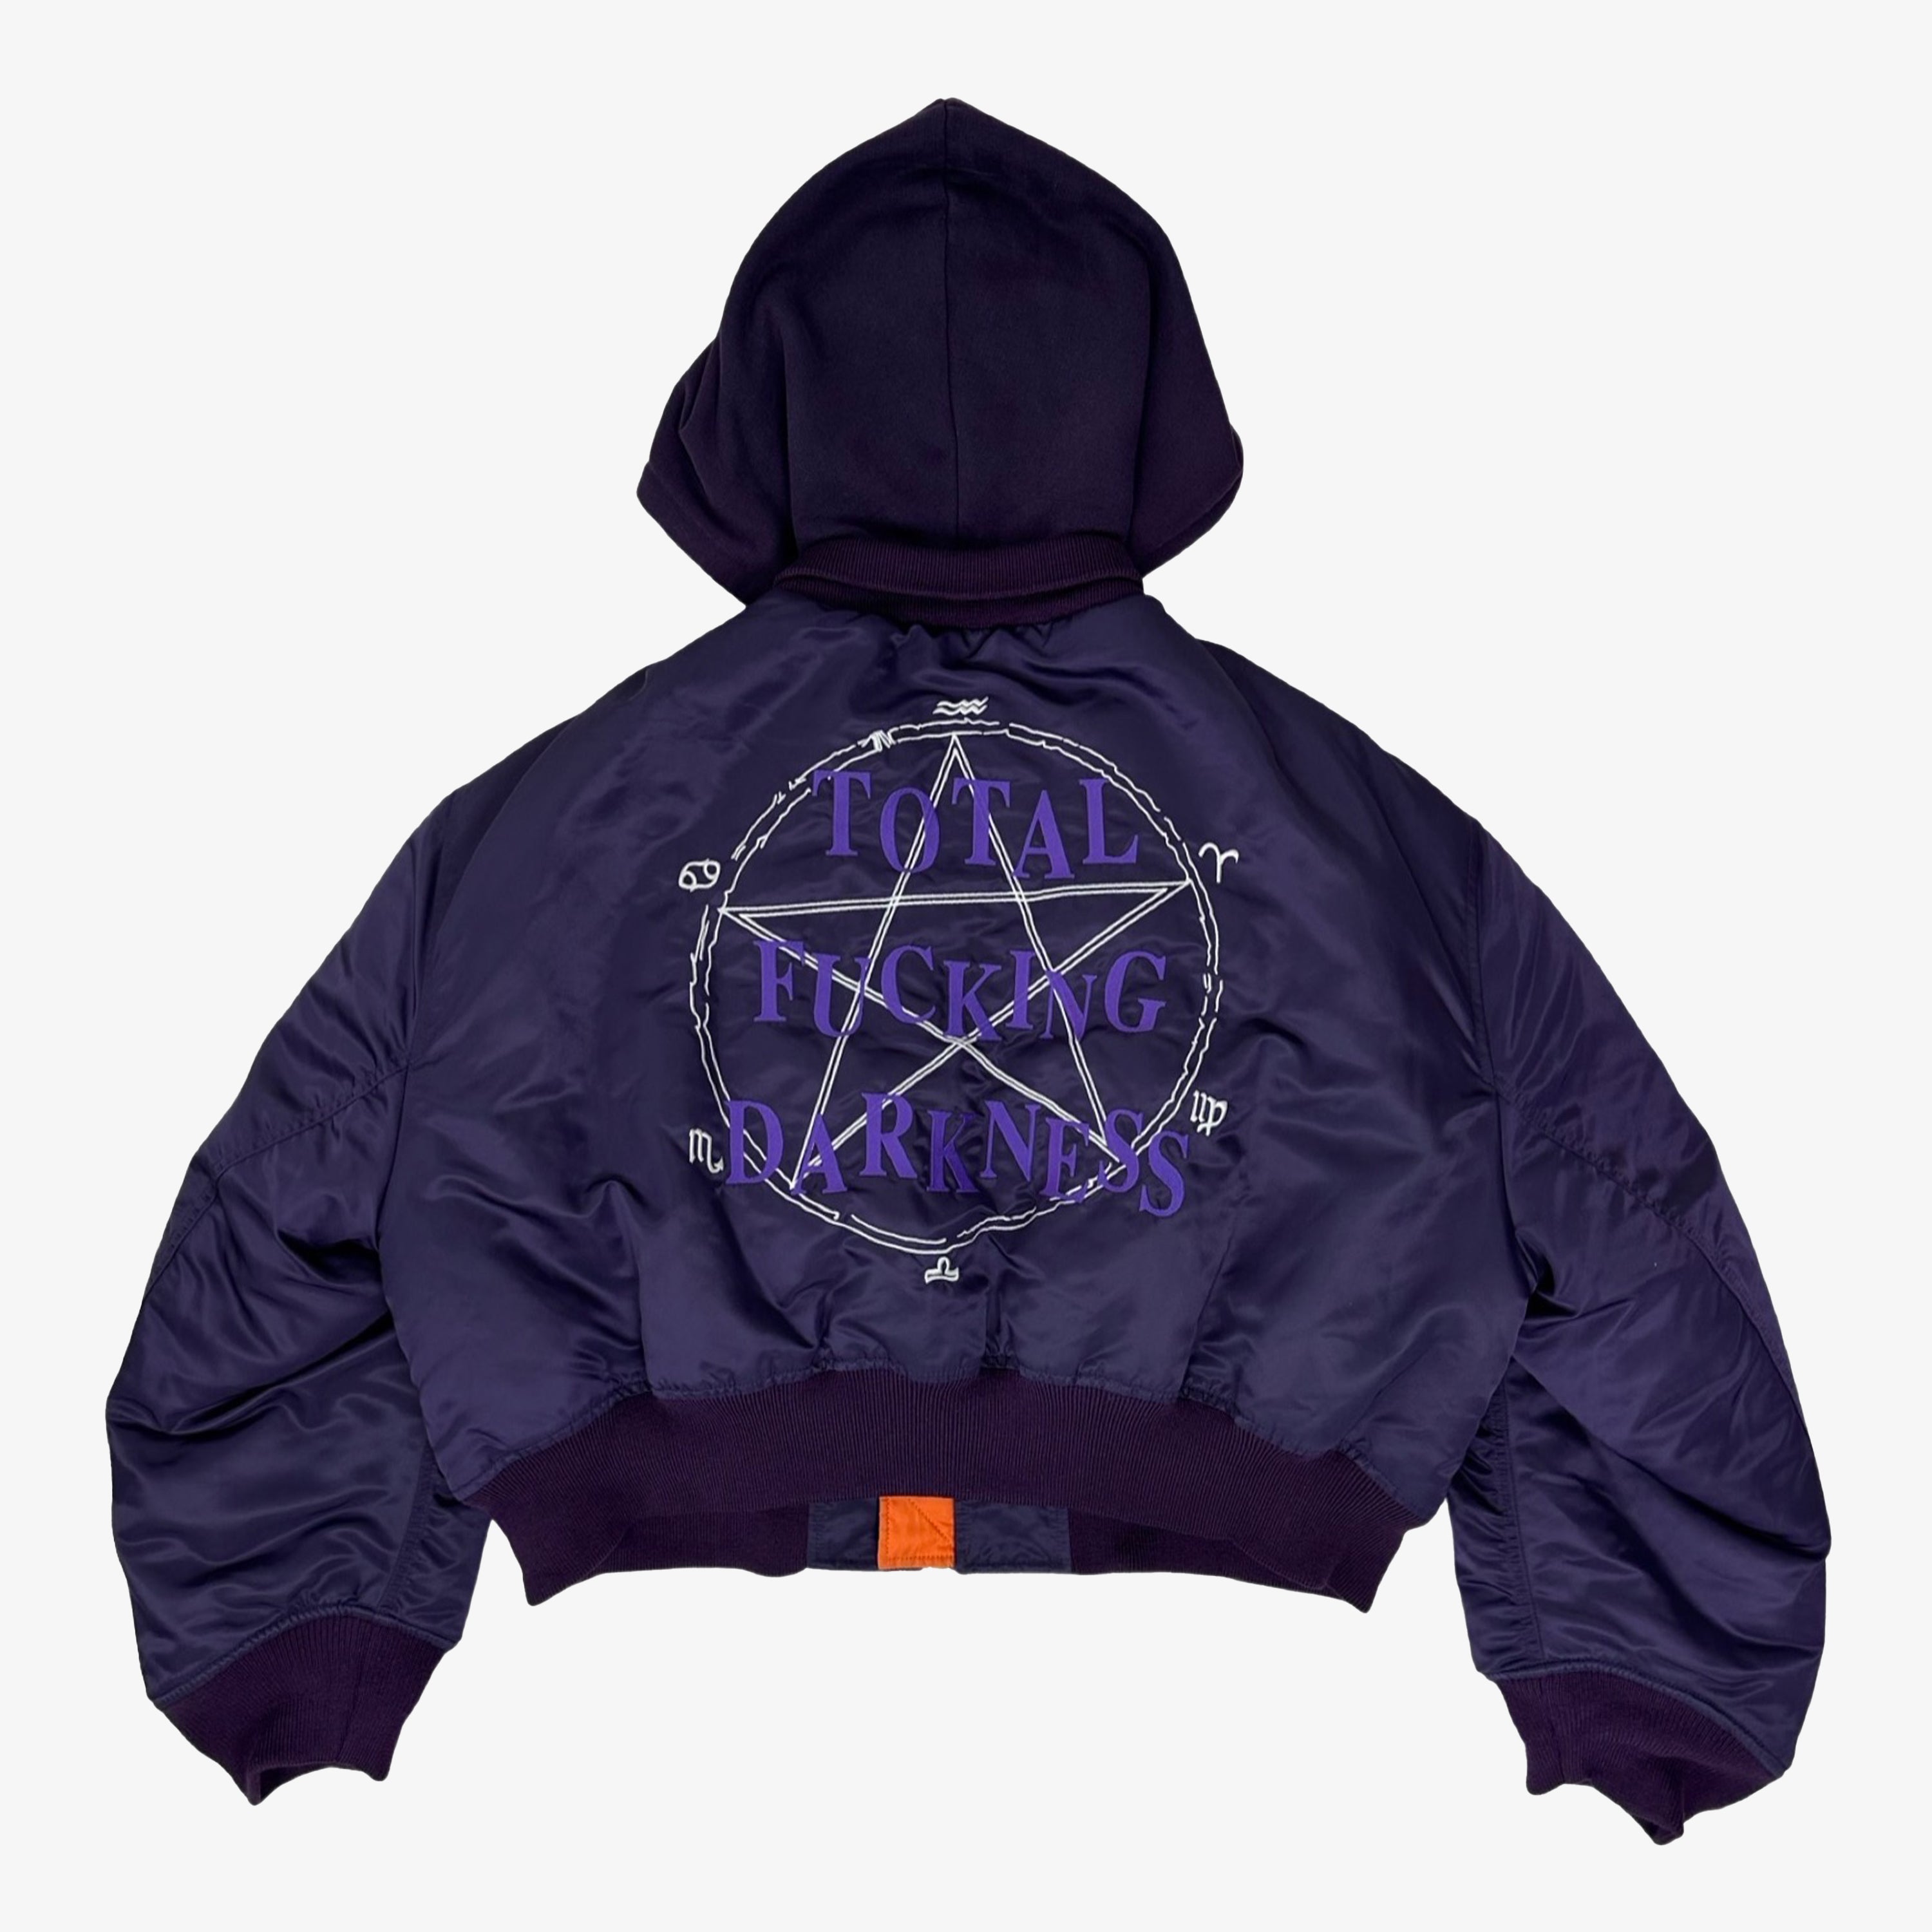 PURPLE TOTAL FUCKING DARKNESS HOODED BOMBER